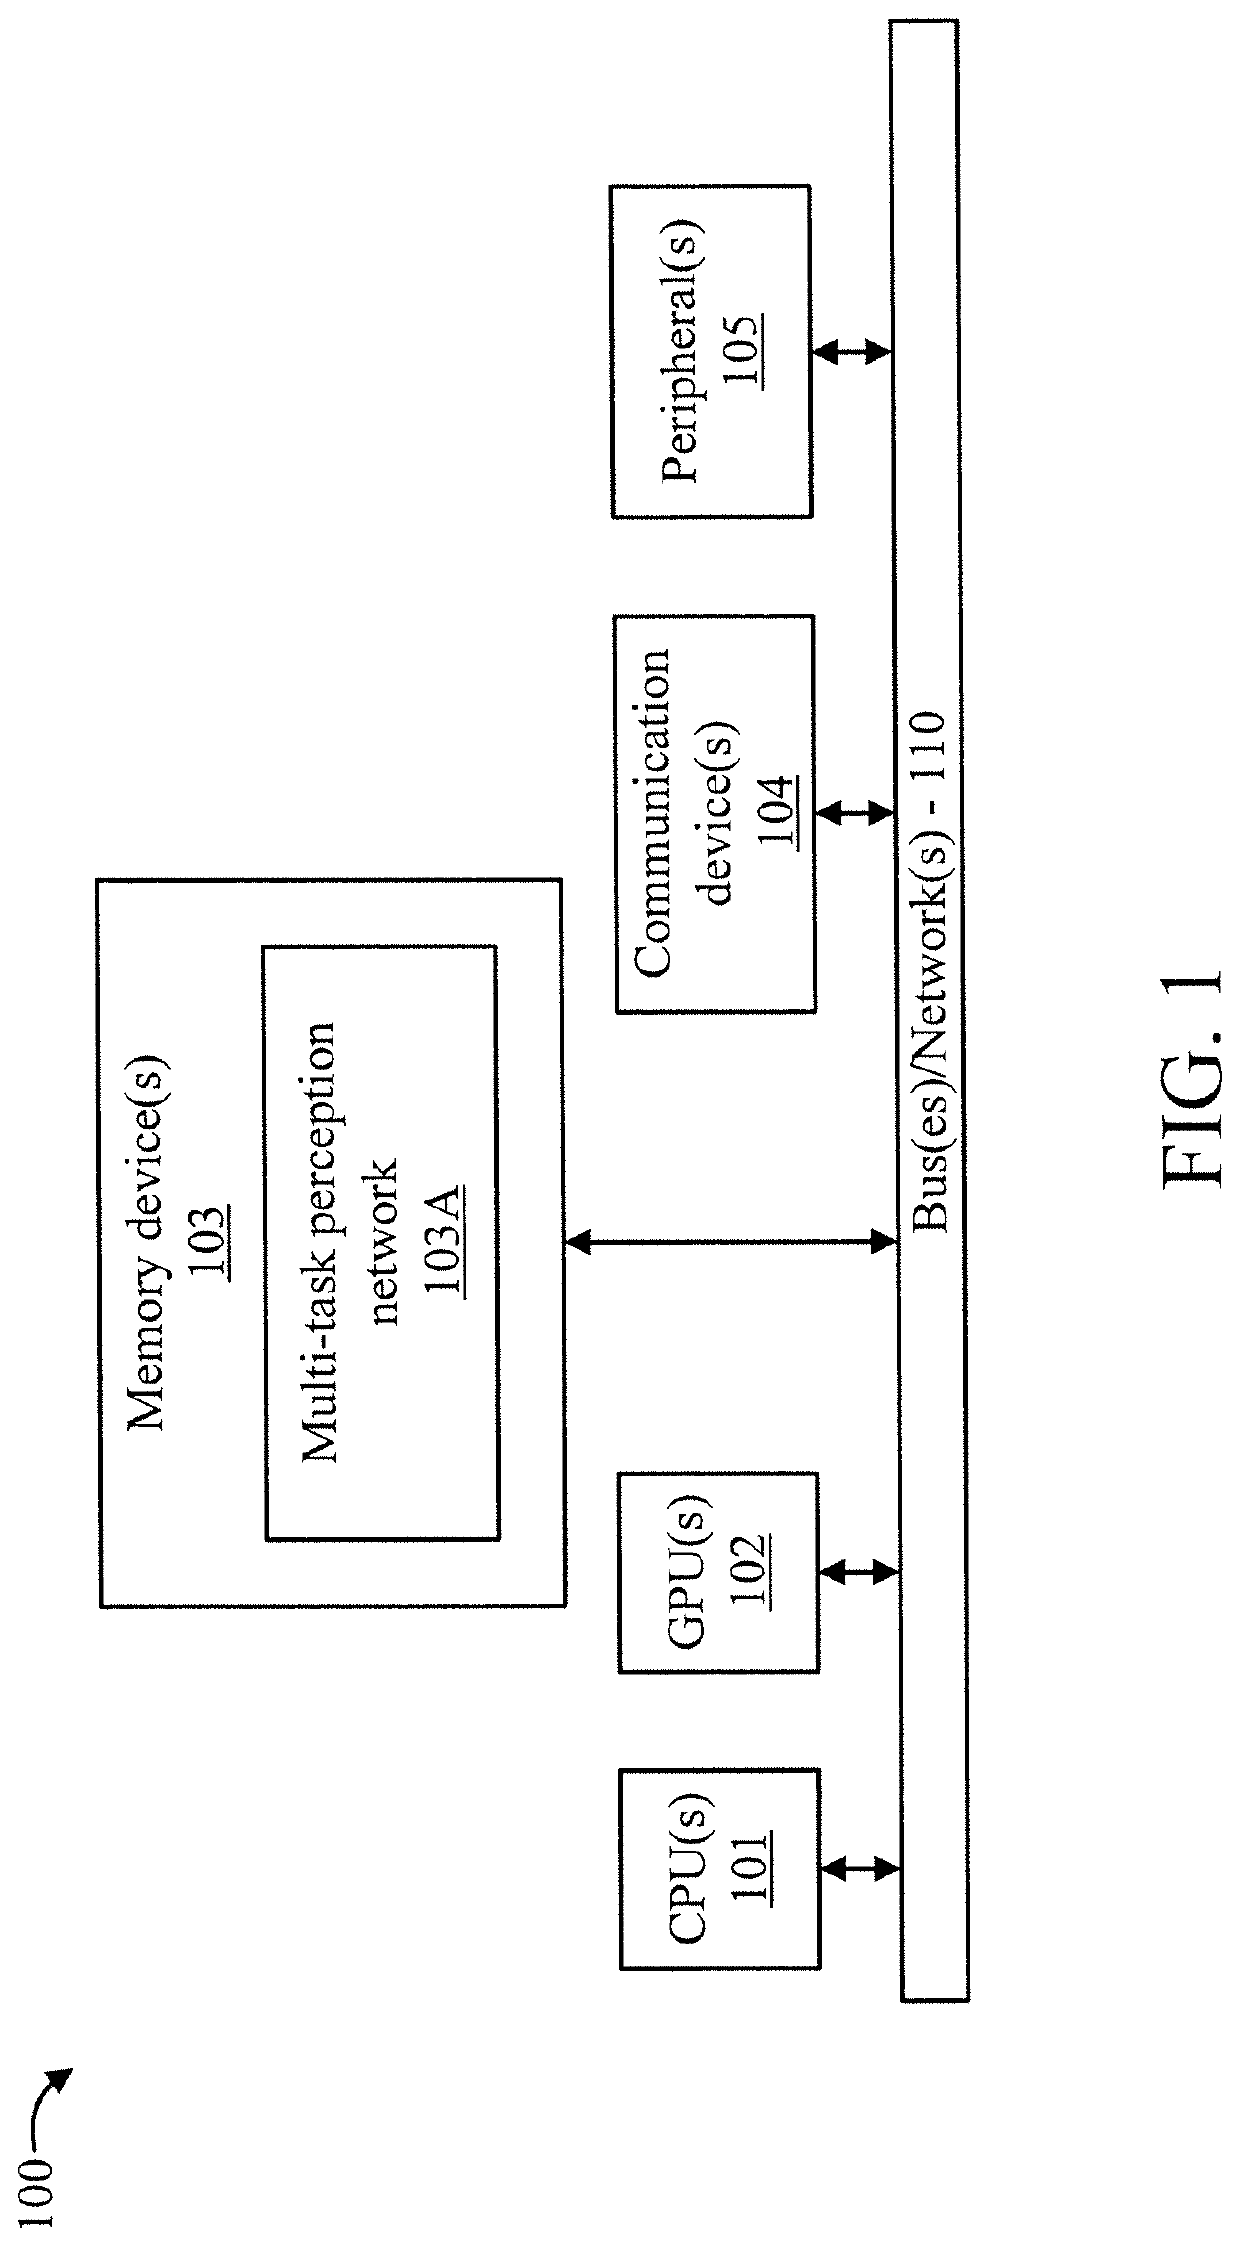 Multi-task perception network with applications to scene understanding and advanced driver-assistance system